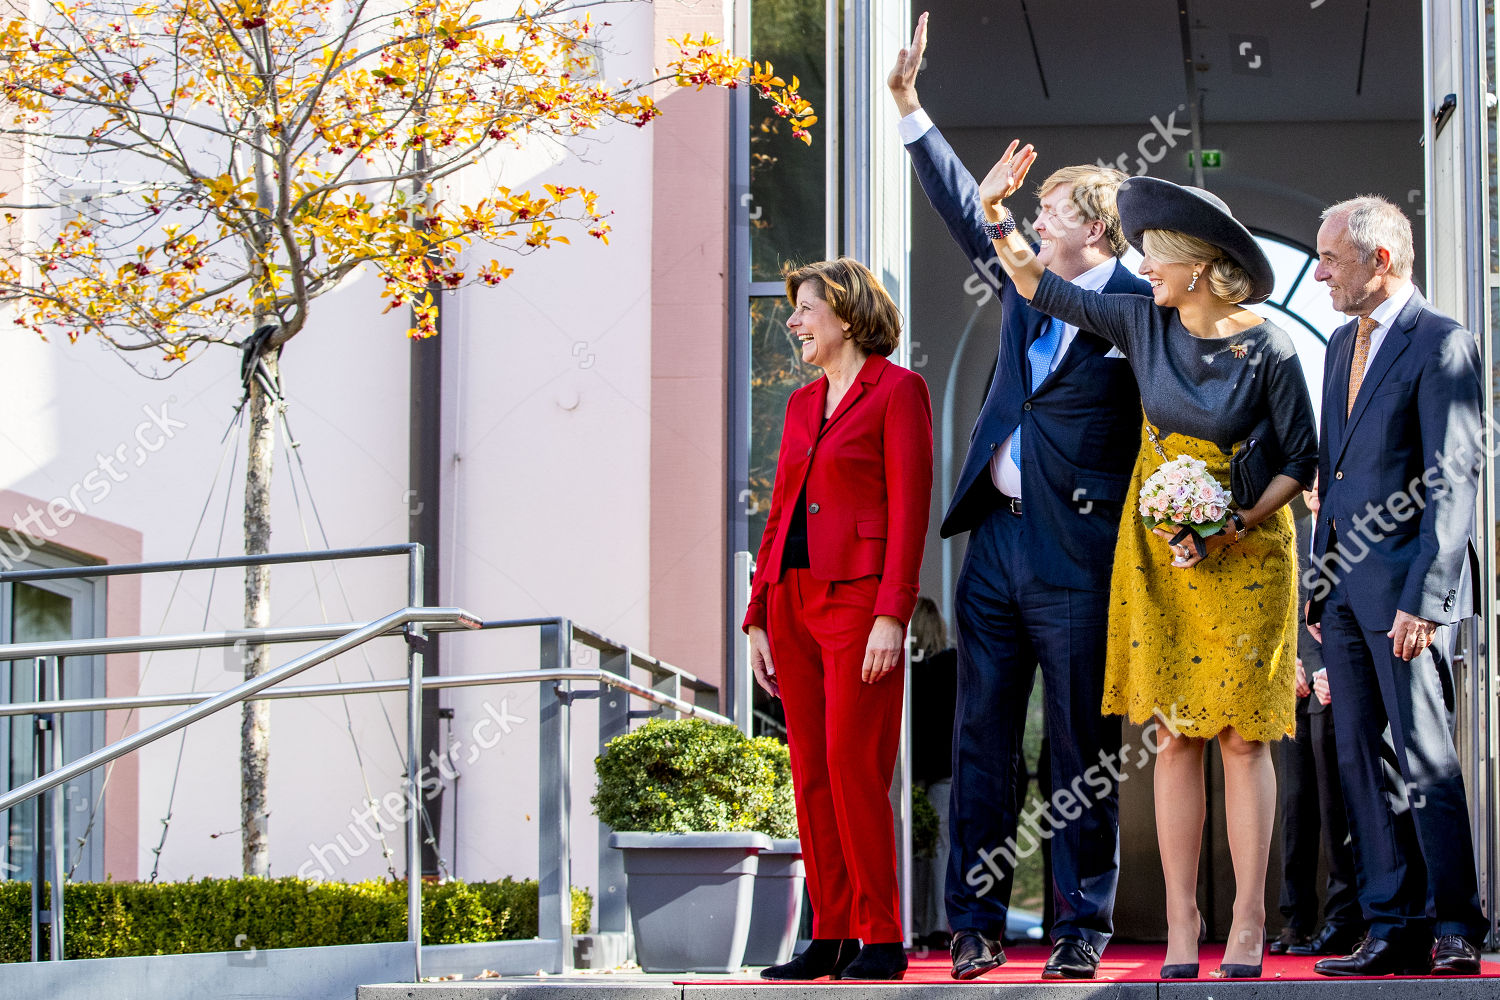 arrival-of-king-willem-alexander-and-queen-maxima-at-the-state-chancellery-of-rhineland-palatinate-mainz-germany-shutterstock-editorial-9921368n.jpg